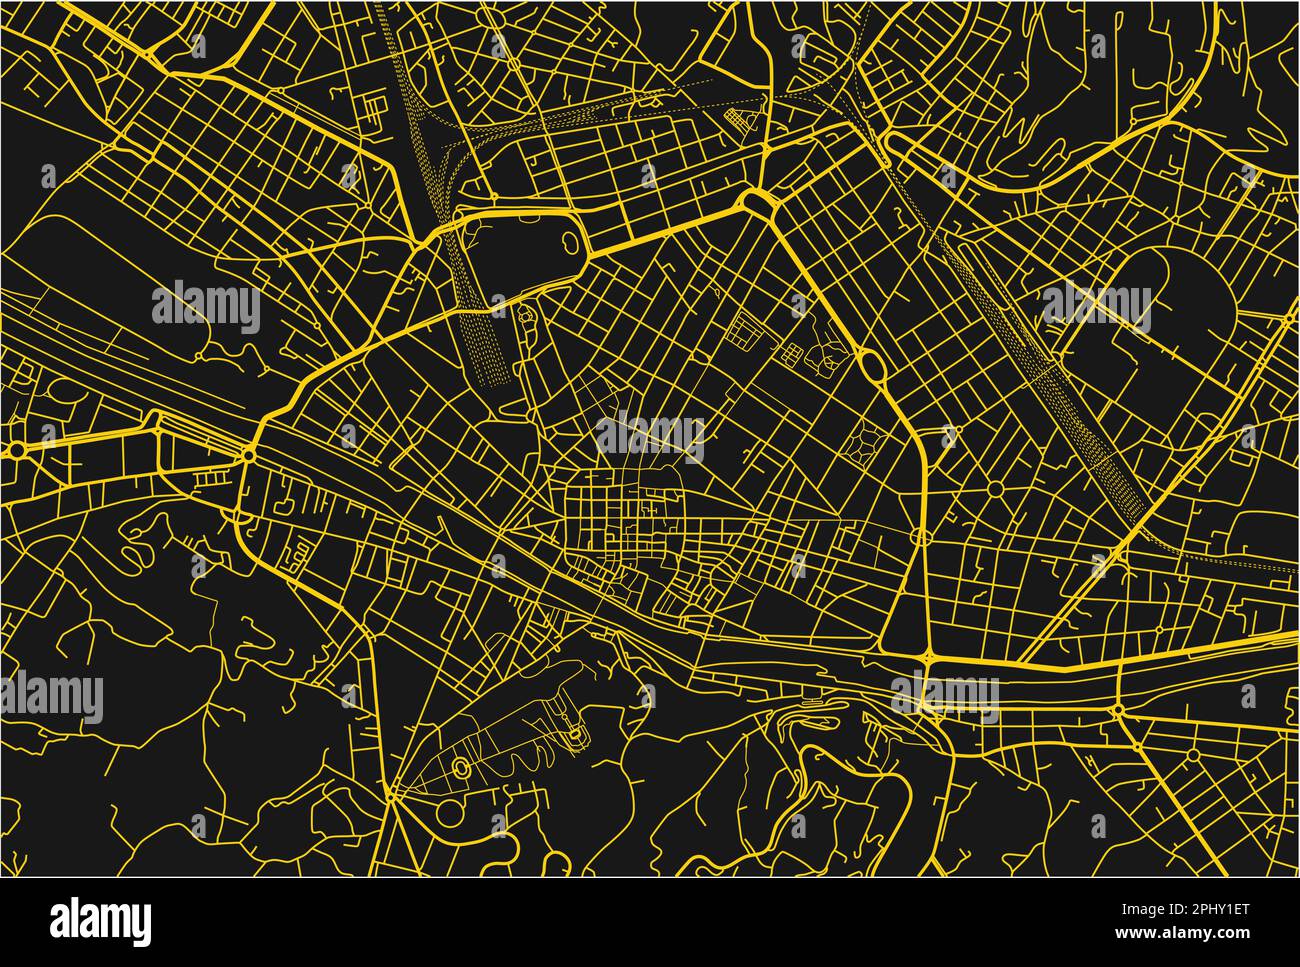 Black and yellow vector city map of Florence with well organized separated layers. Stock Vector